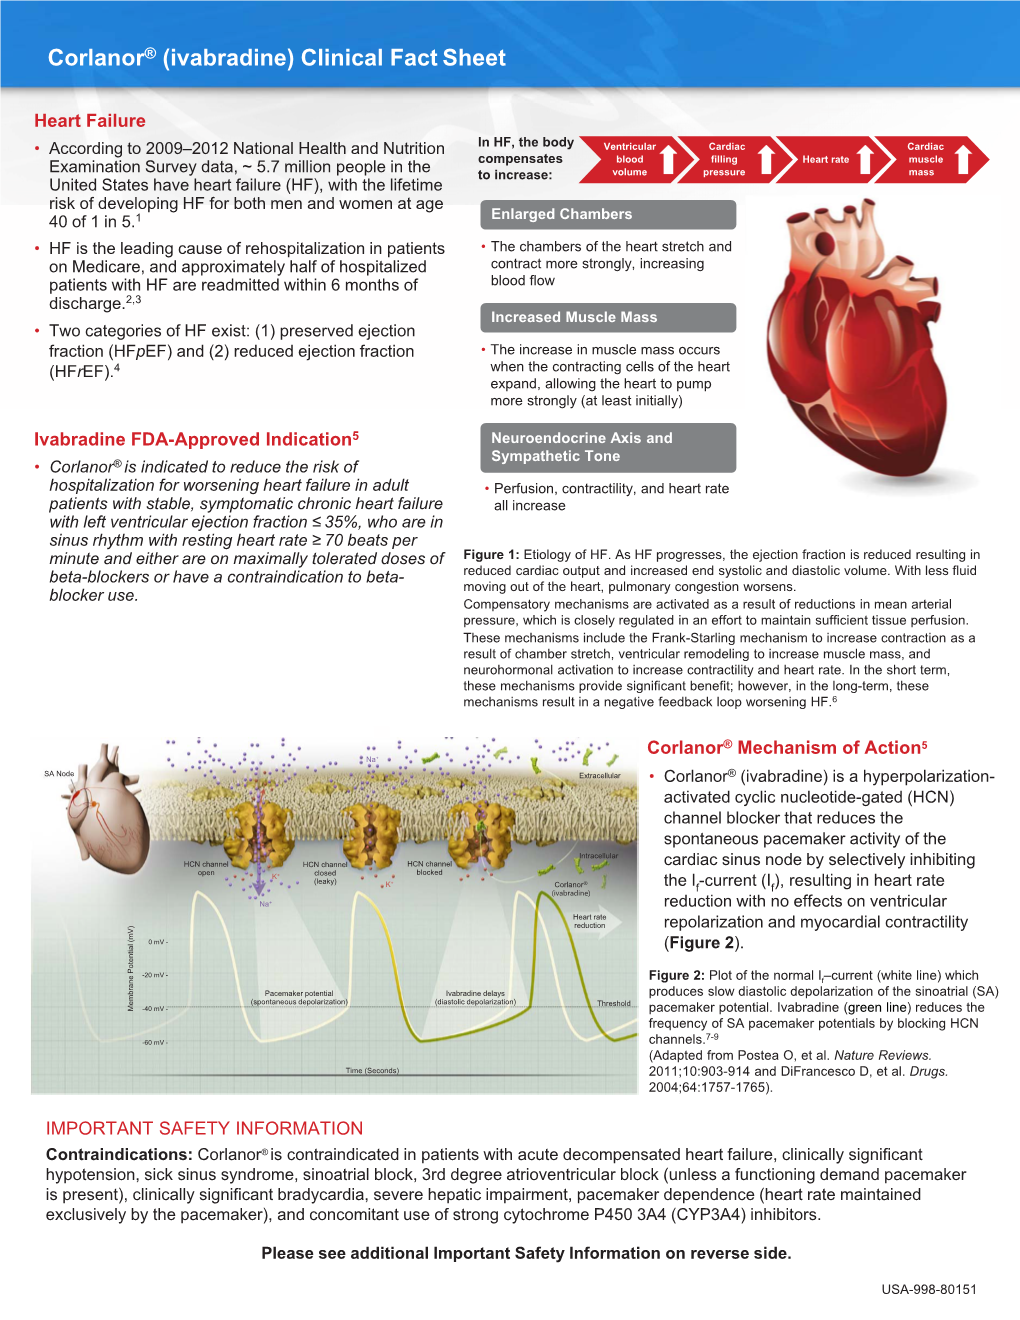 Corlanor® (Ivabradine) Clinical Fact Sheet